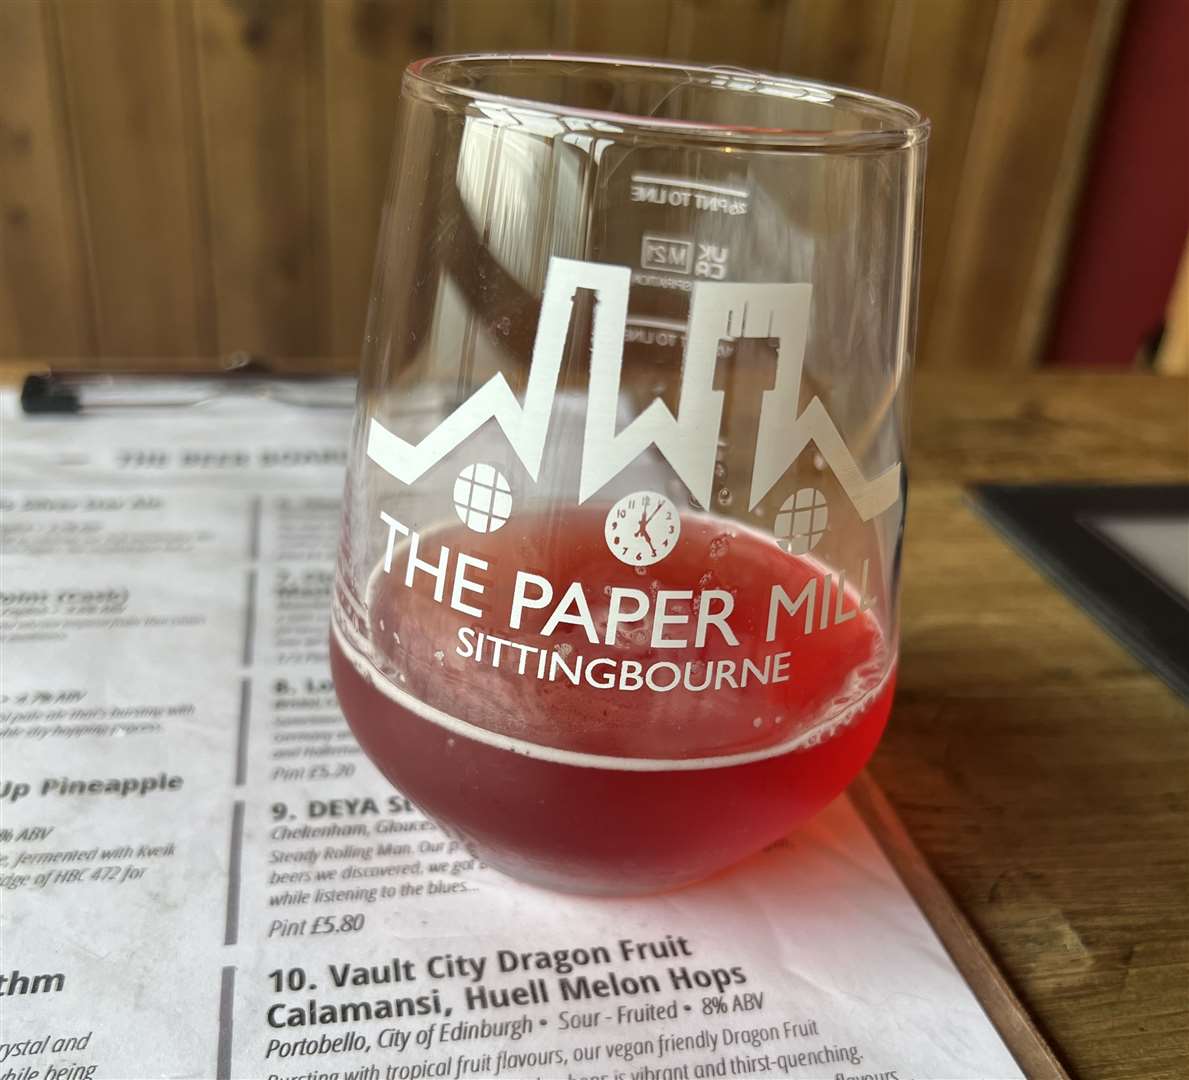 The dragon fruit beer at The Paper Mill micro-pub in Sittingbourne